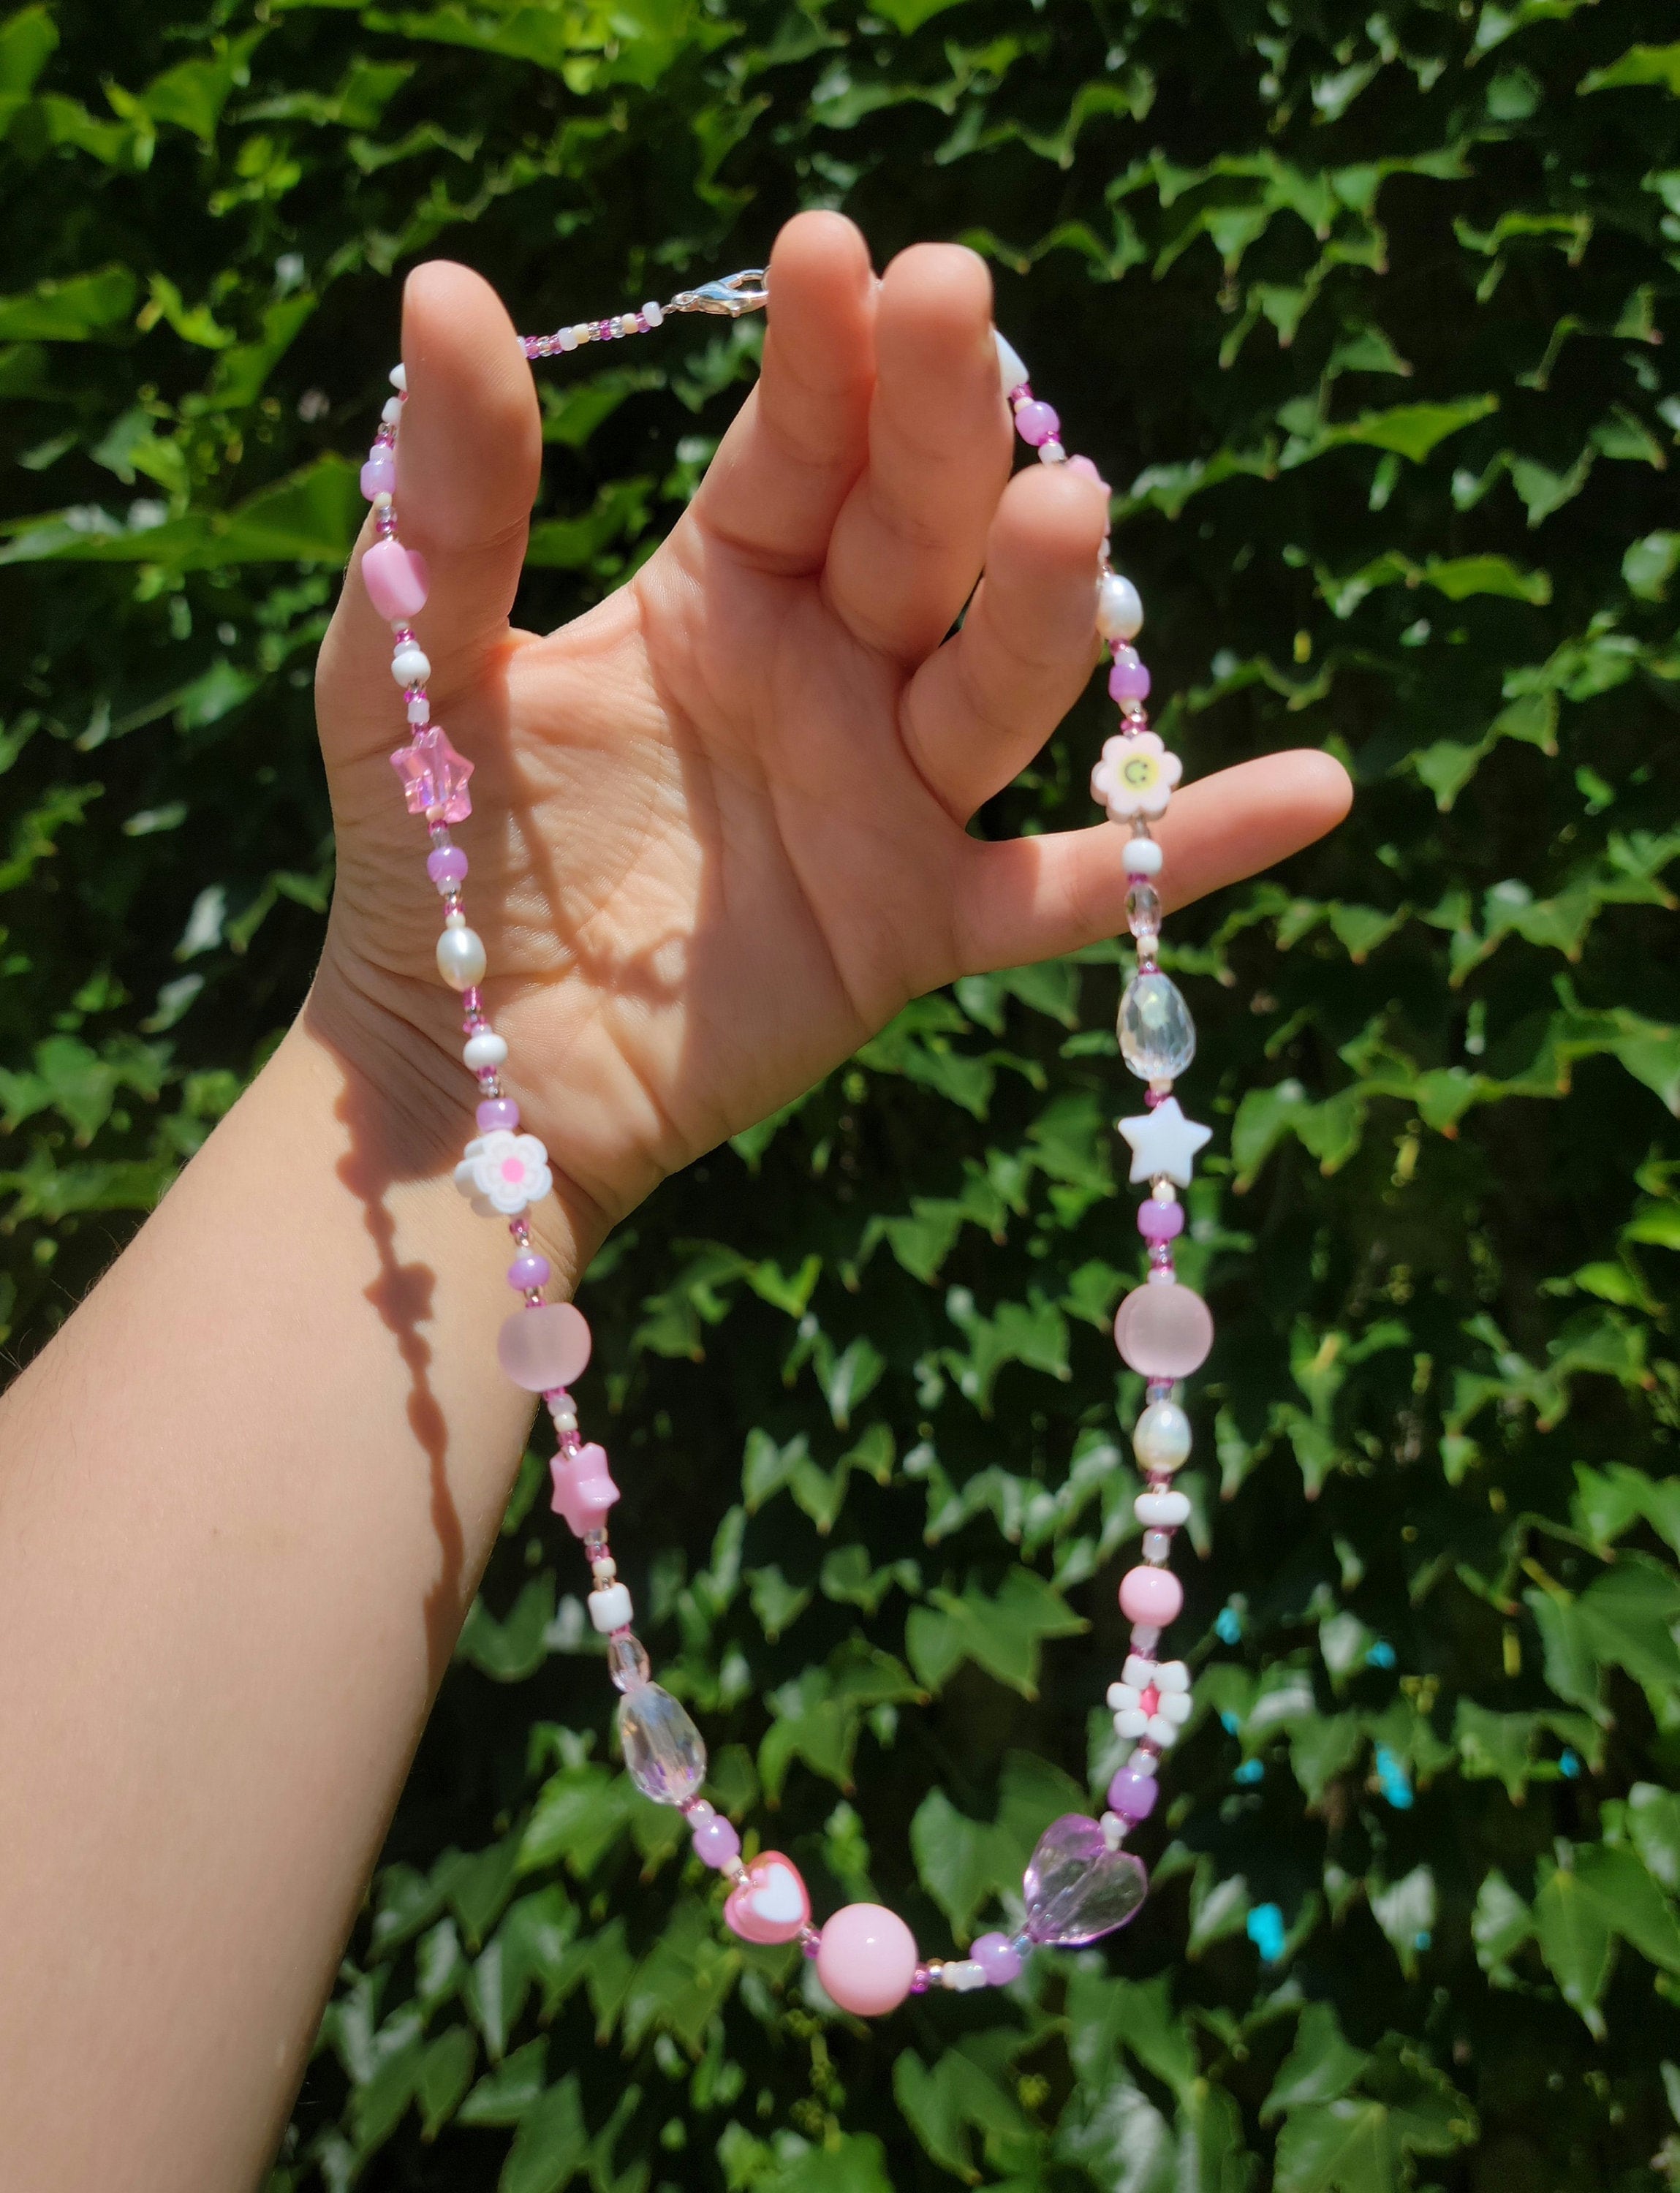 Pink and White Beaded Necklace